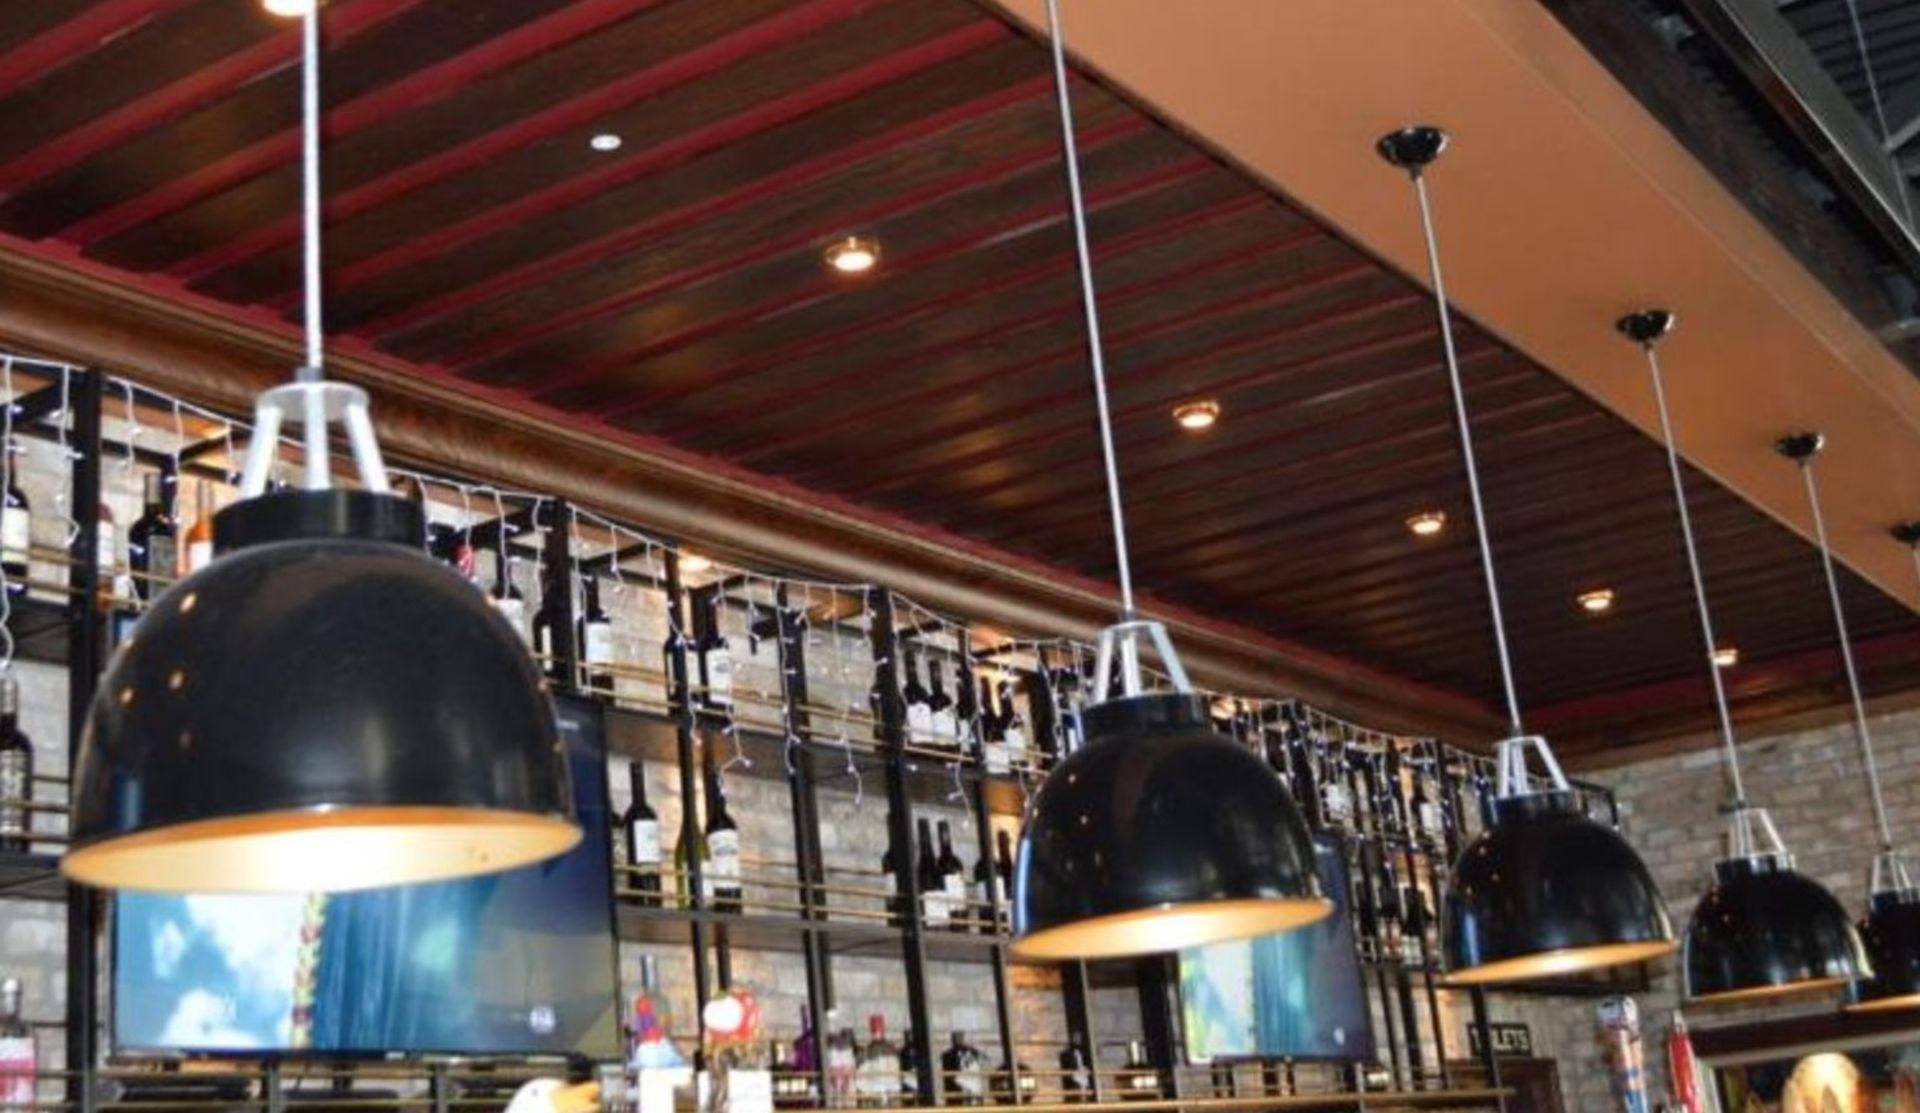 4 x Dome Pendant Light Fittings in Black With Brass Coloured Interior - Approx Drop 120 cms - Image 9 of 9